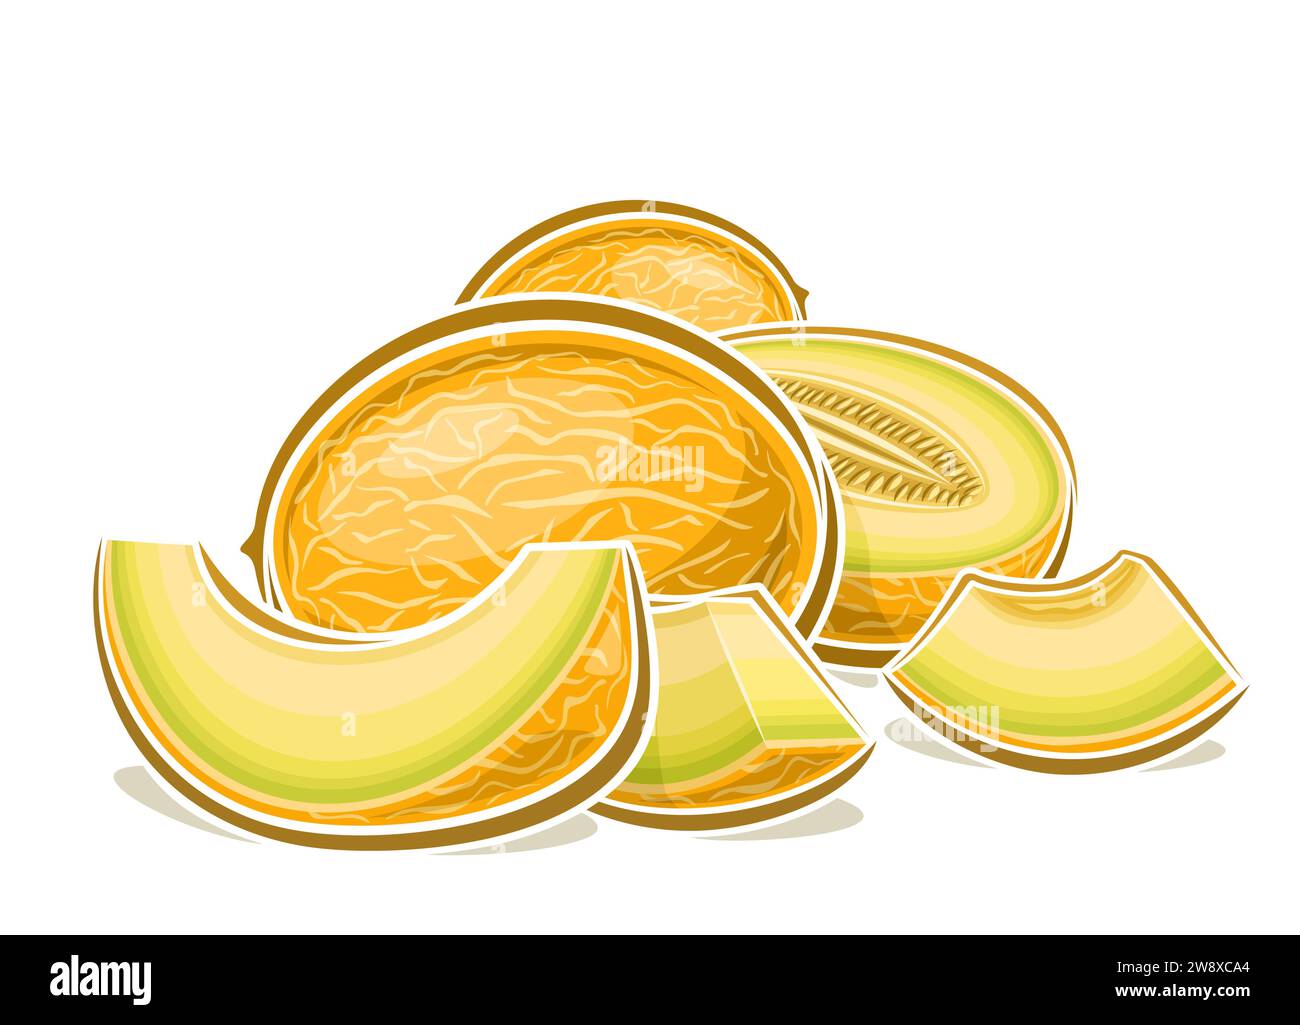 Vector logo for Melon, decorative horizontal poster with outline illustration of whole and sliced melon composition, cartoon design fruity print with Stock Vector